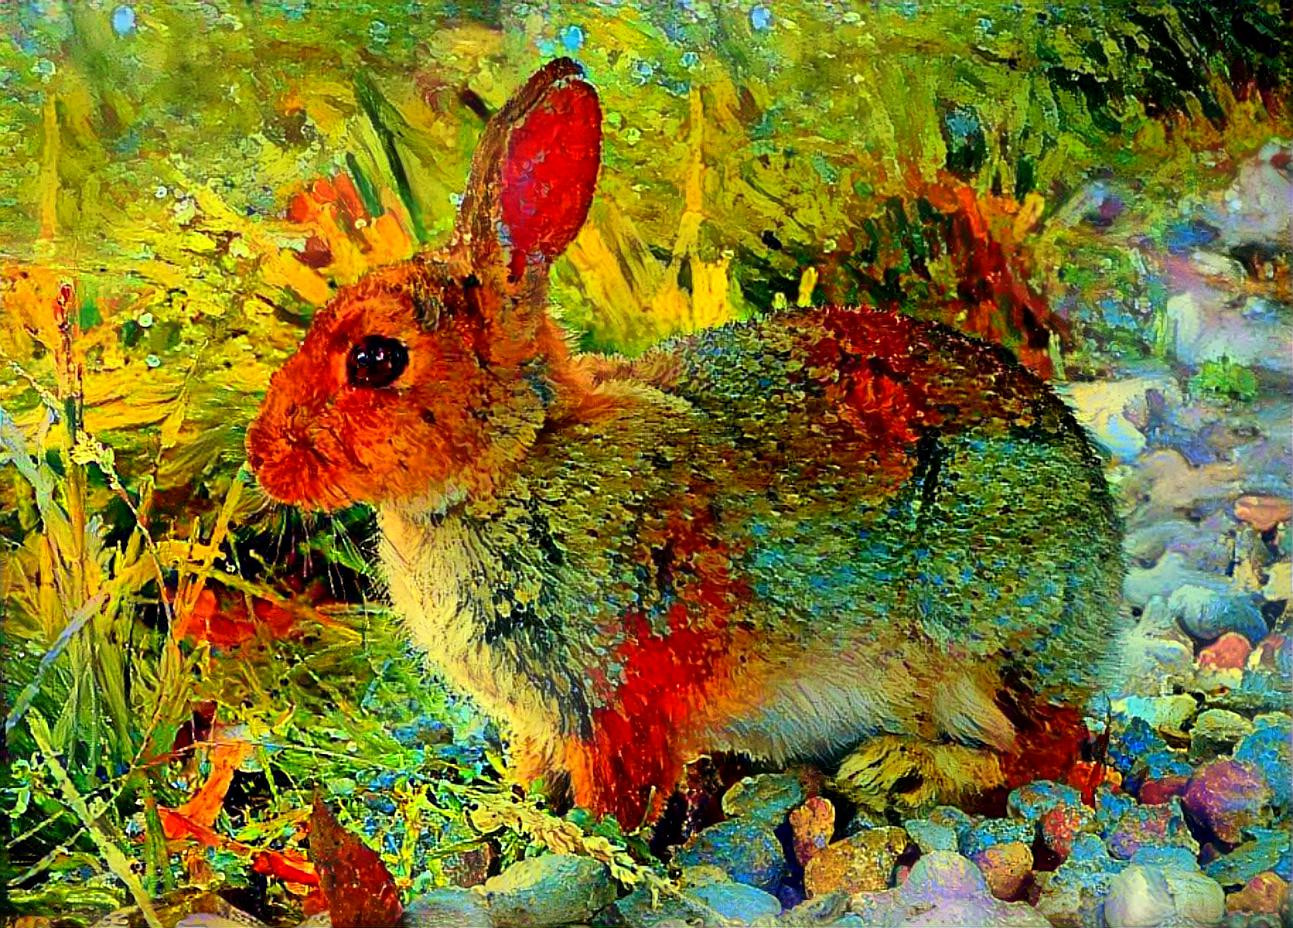 Rabbit. Style is from detail in "Flowers in a Vase" by Vincent van Gogh